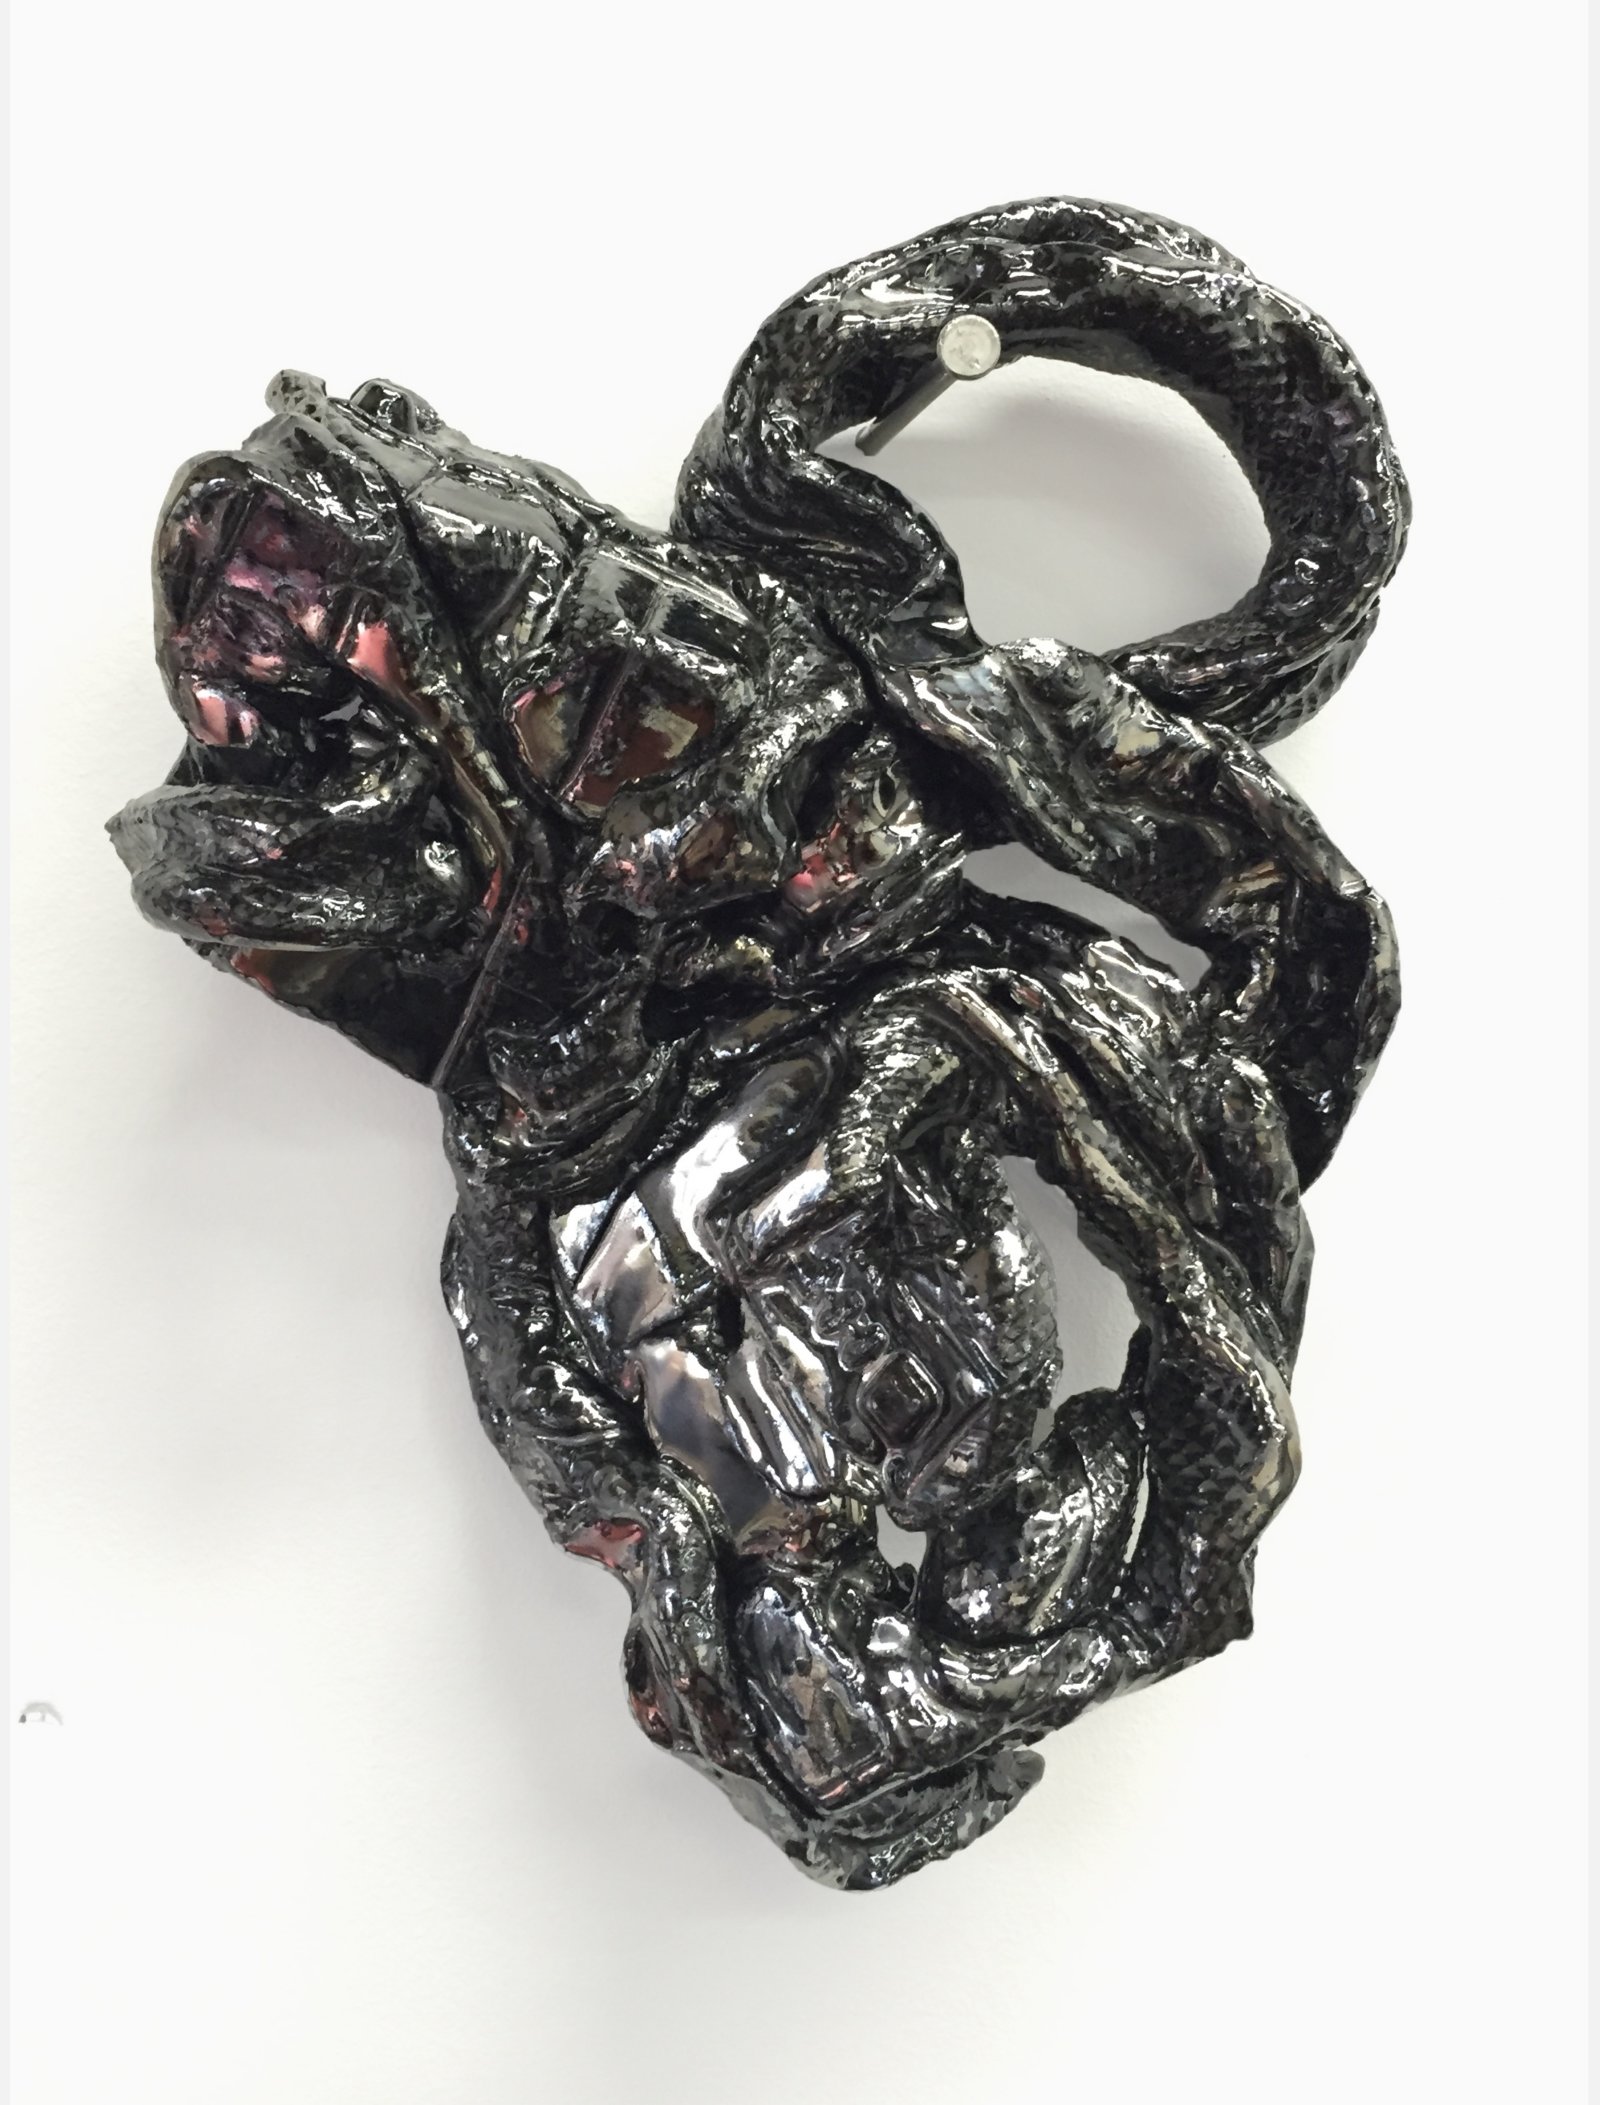 Rochelle Goldberg, In Tangle Out, 2015, fired ceramic and nail, 14 x 9 x 5 in. (36 x 23 x 13 cm)